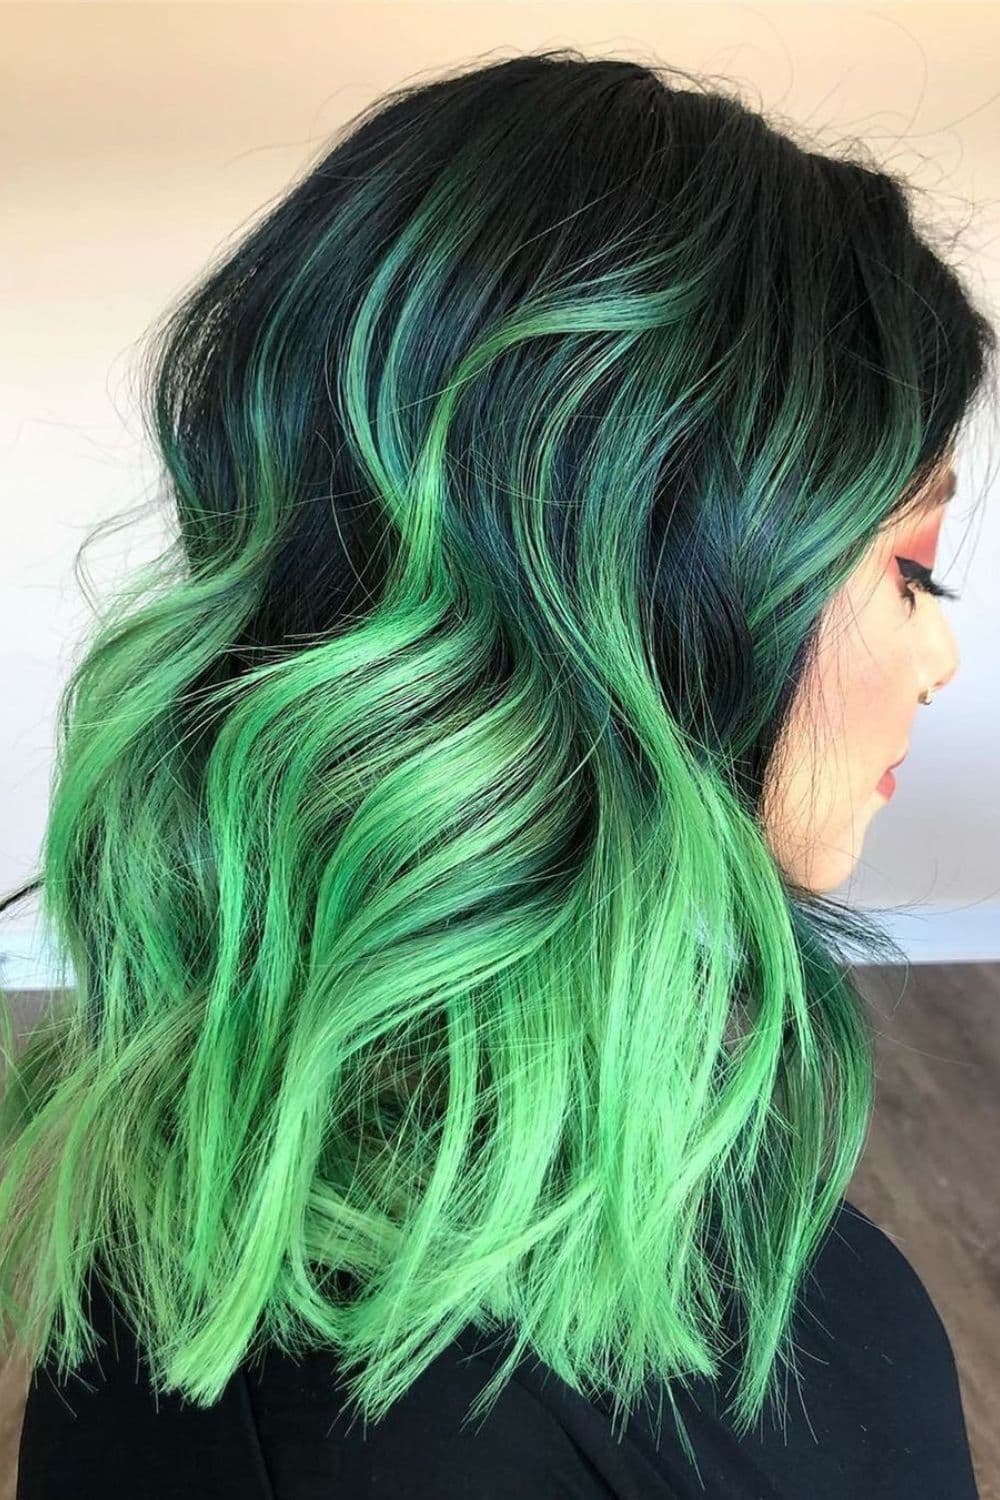 A woman with a neon green ombre hair.